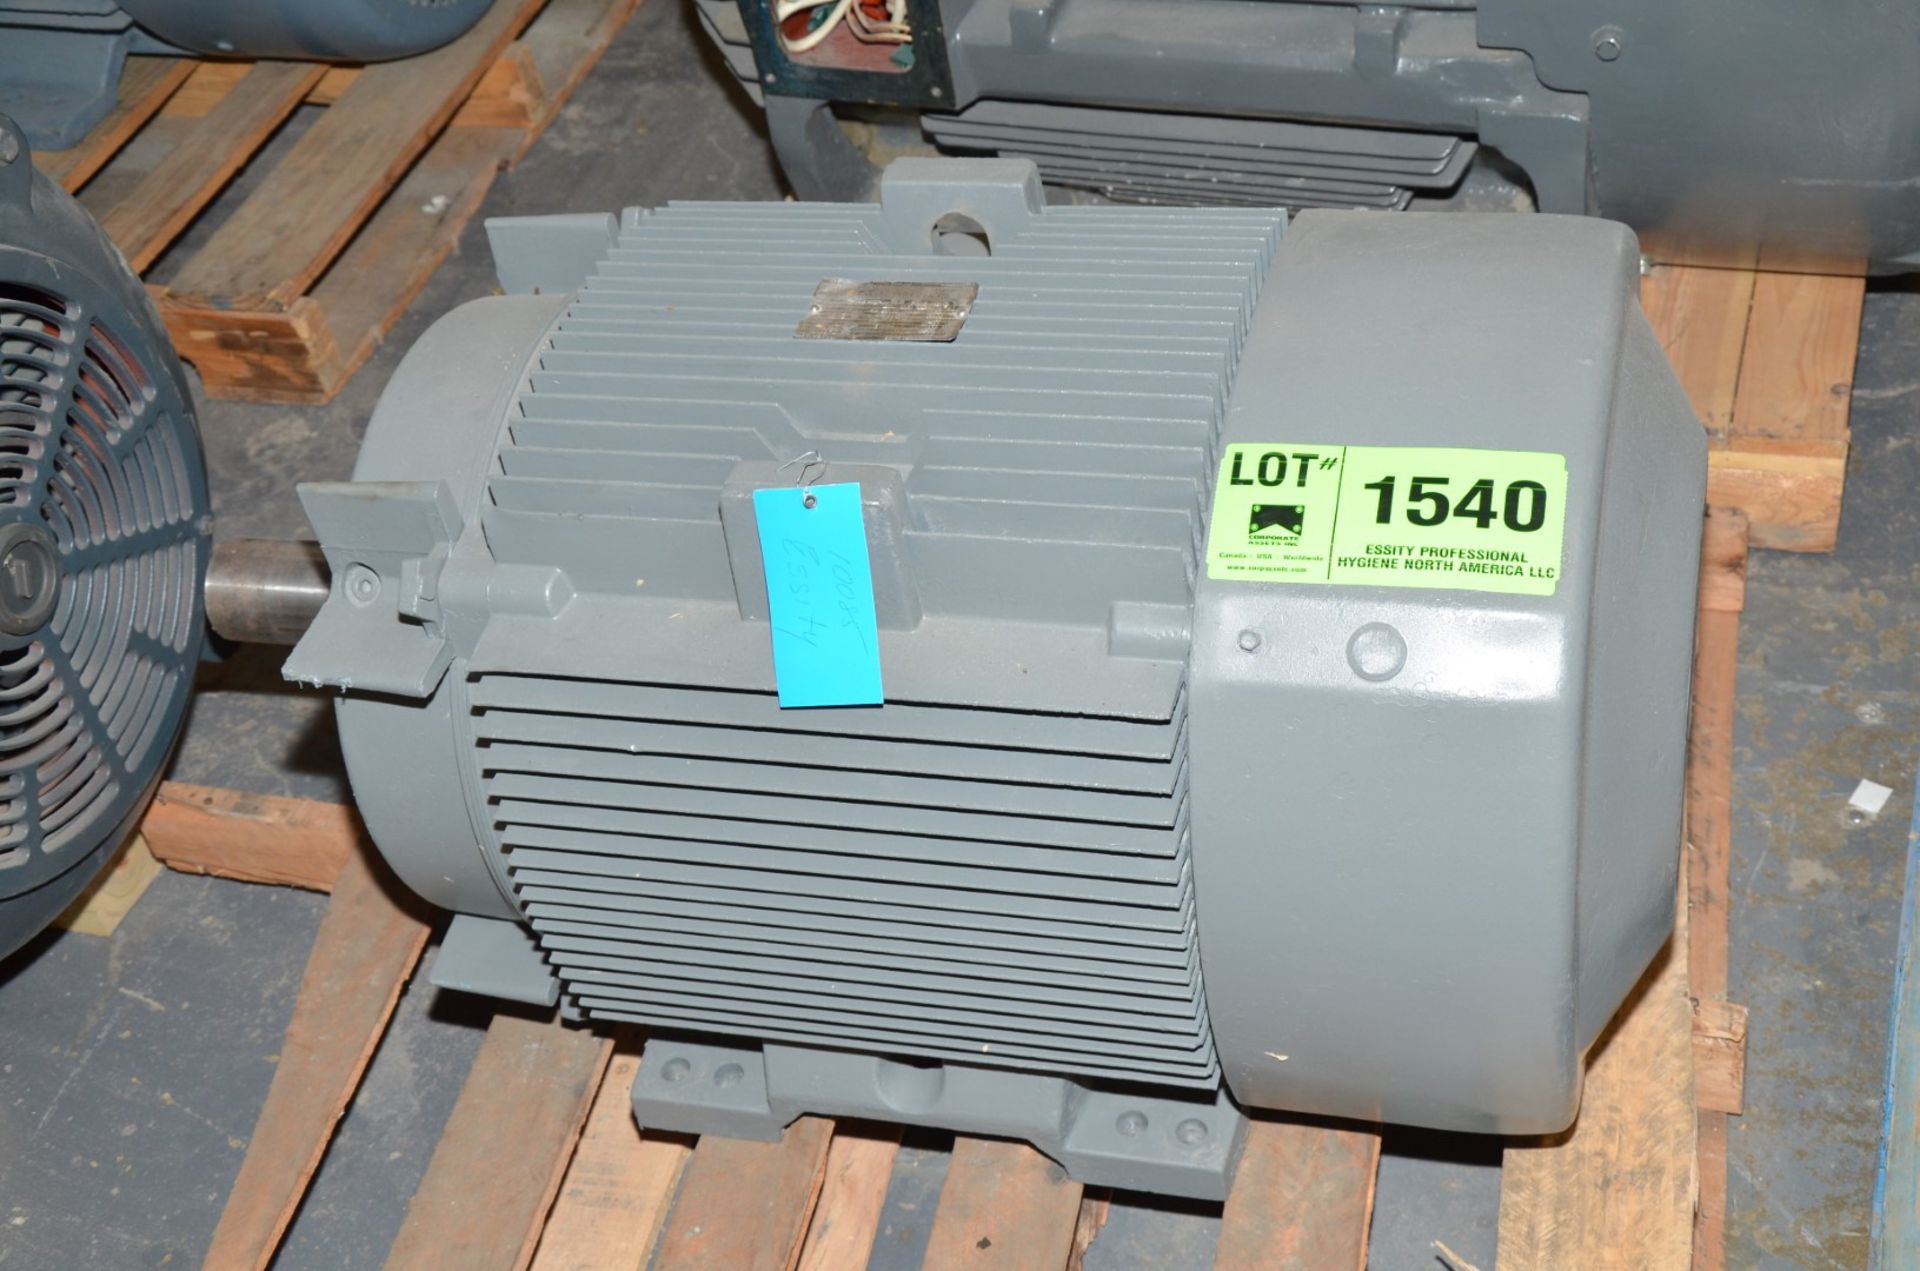 GE 75 HP 1185 RPM 460V ELECTRIC MOTOR [RIGGING FEE FOR LOT #1540 - $50 USD PLUS APPLICABLE TAXES]